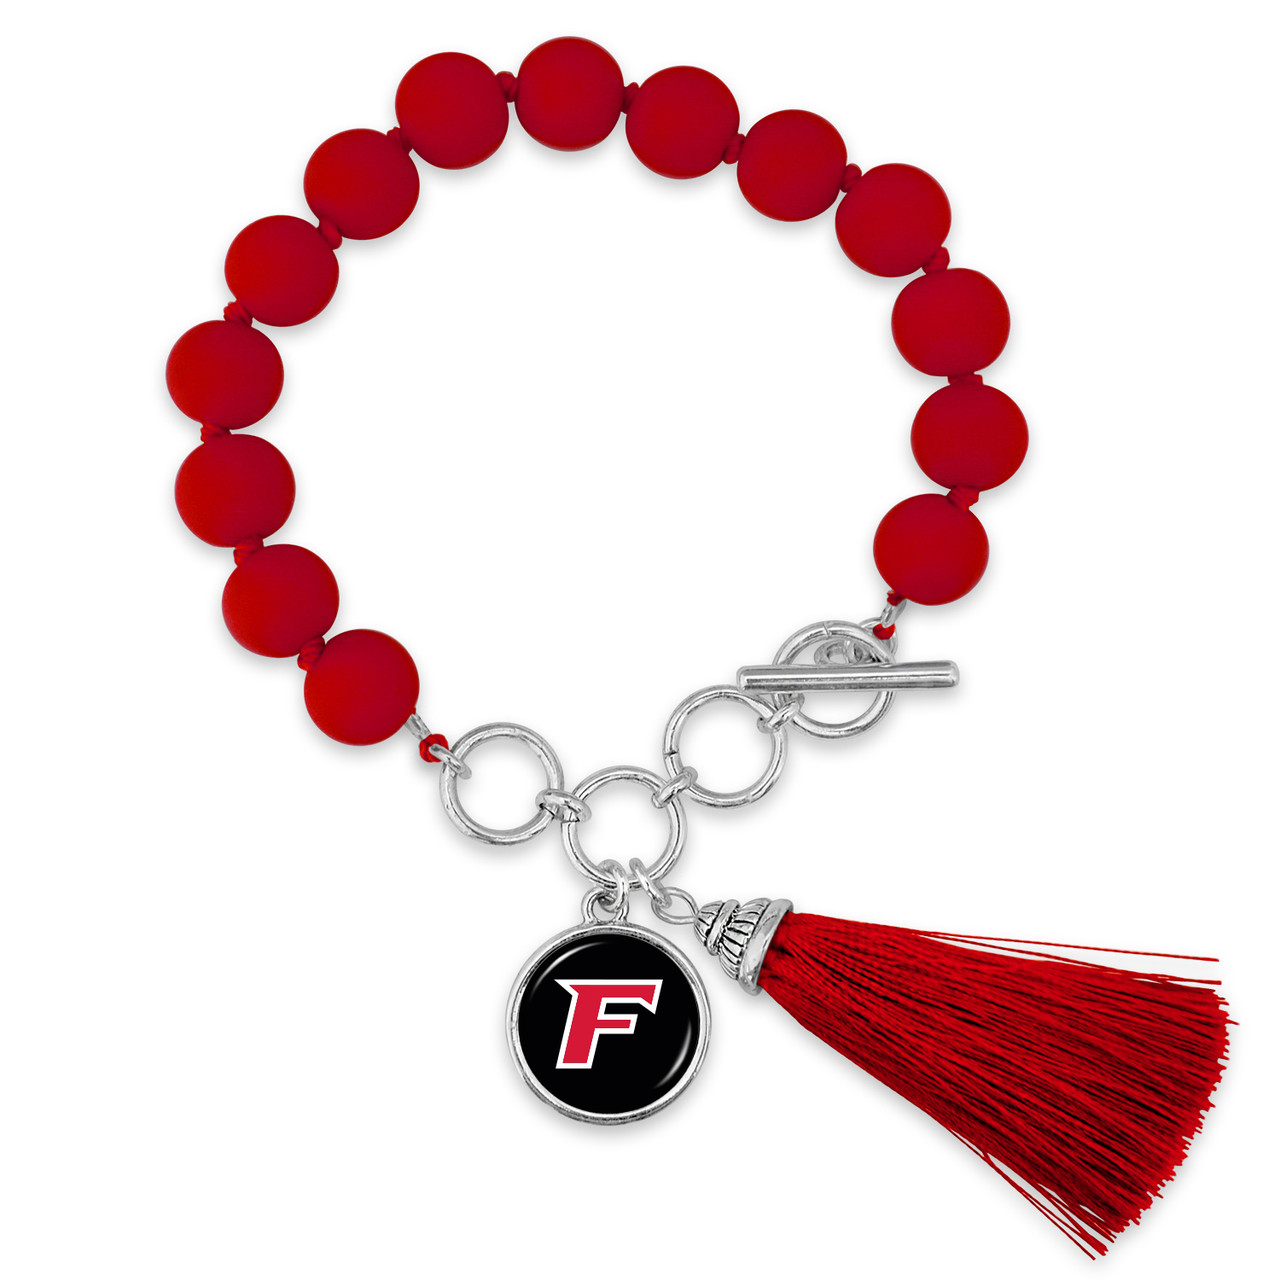 Fairfield Stags Bracelet- No Strings Attached